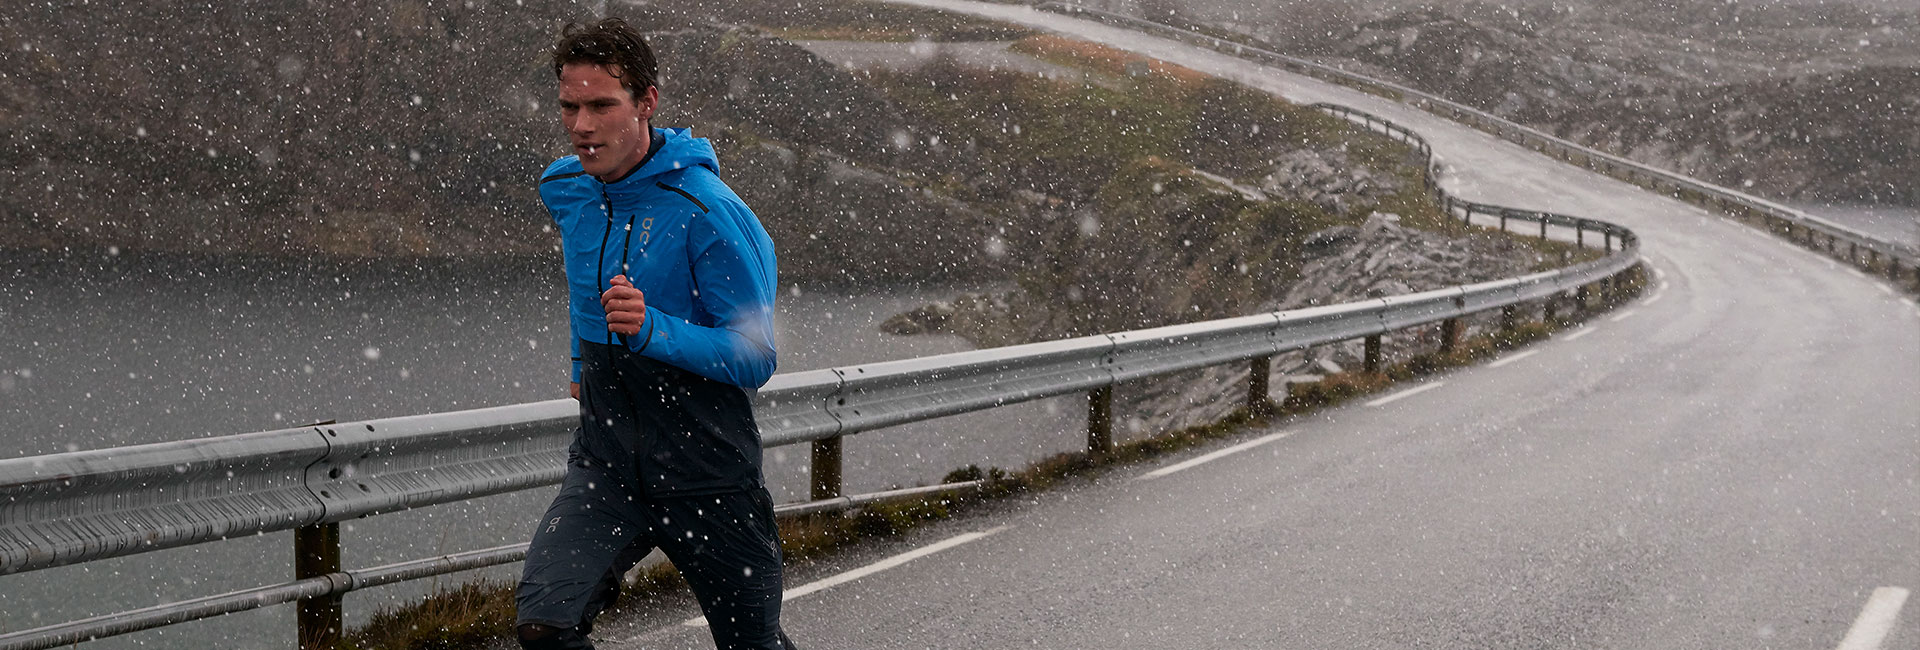 Winter Running Gear Guide – What to Wear in the Cold